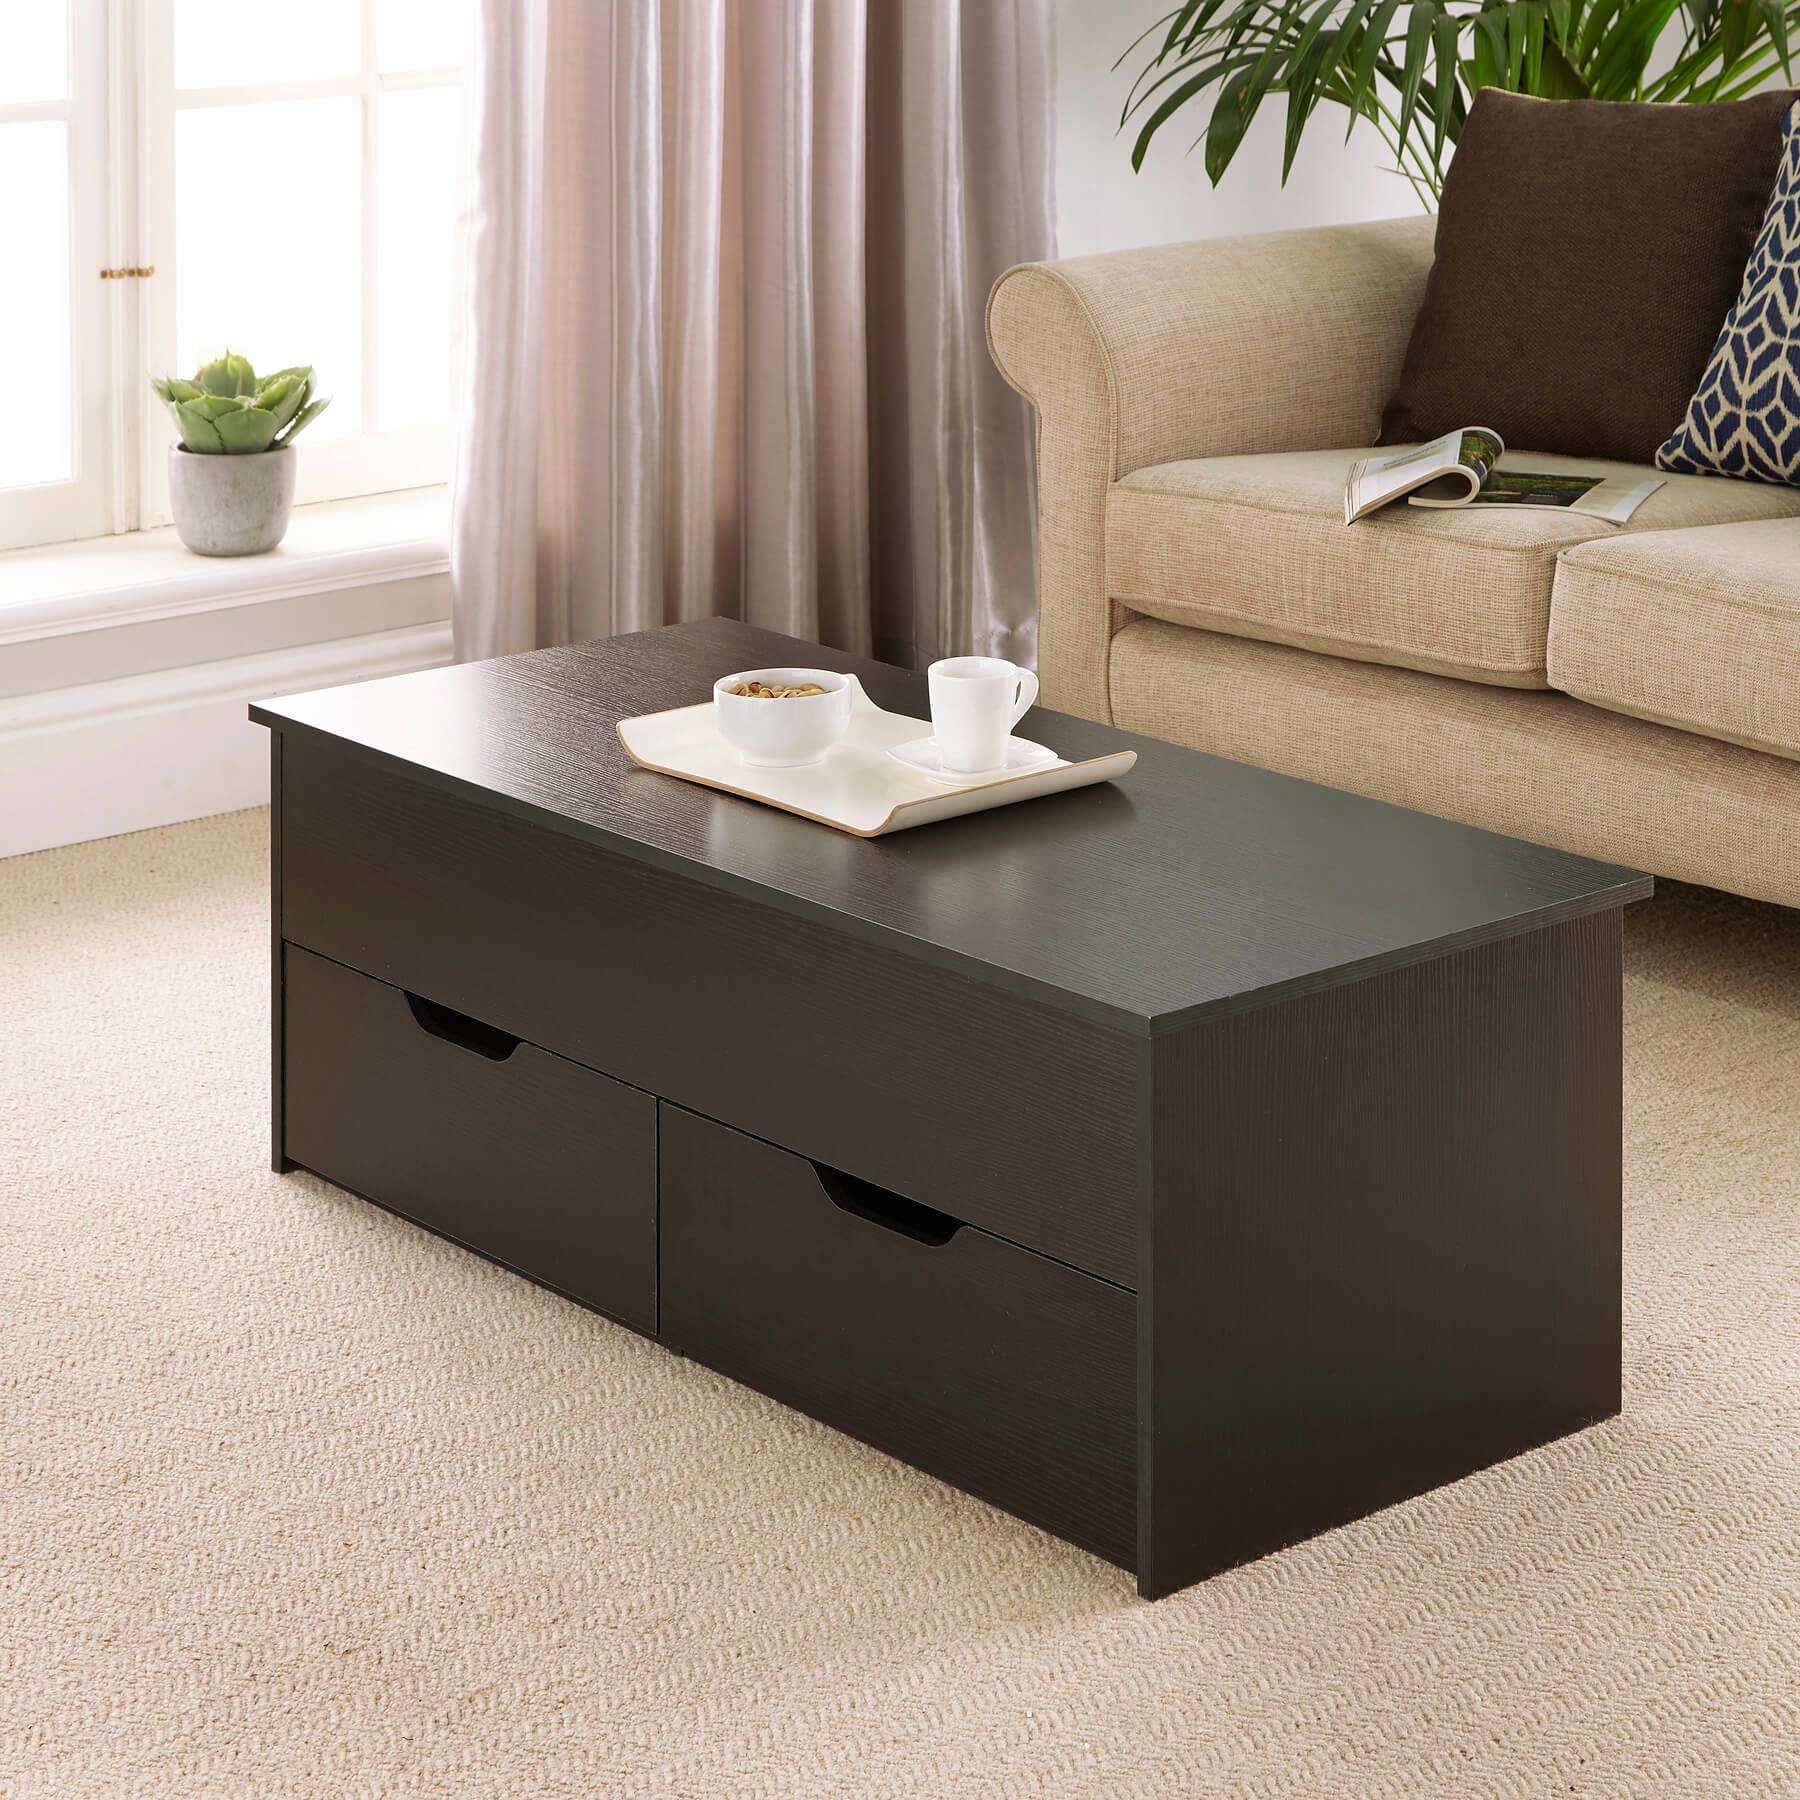 Black Wooden Coffee Table With Lift Up Top and 2 Large Storage Drawers ...